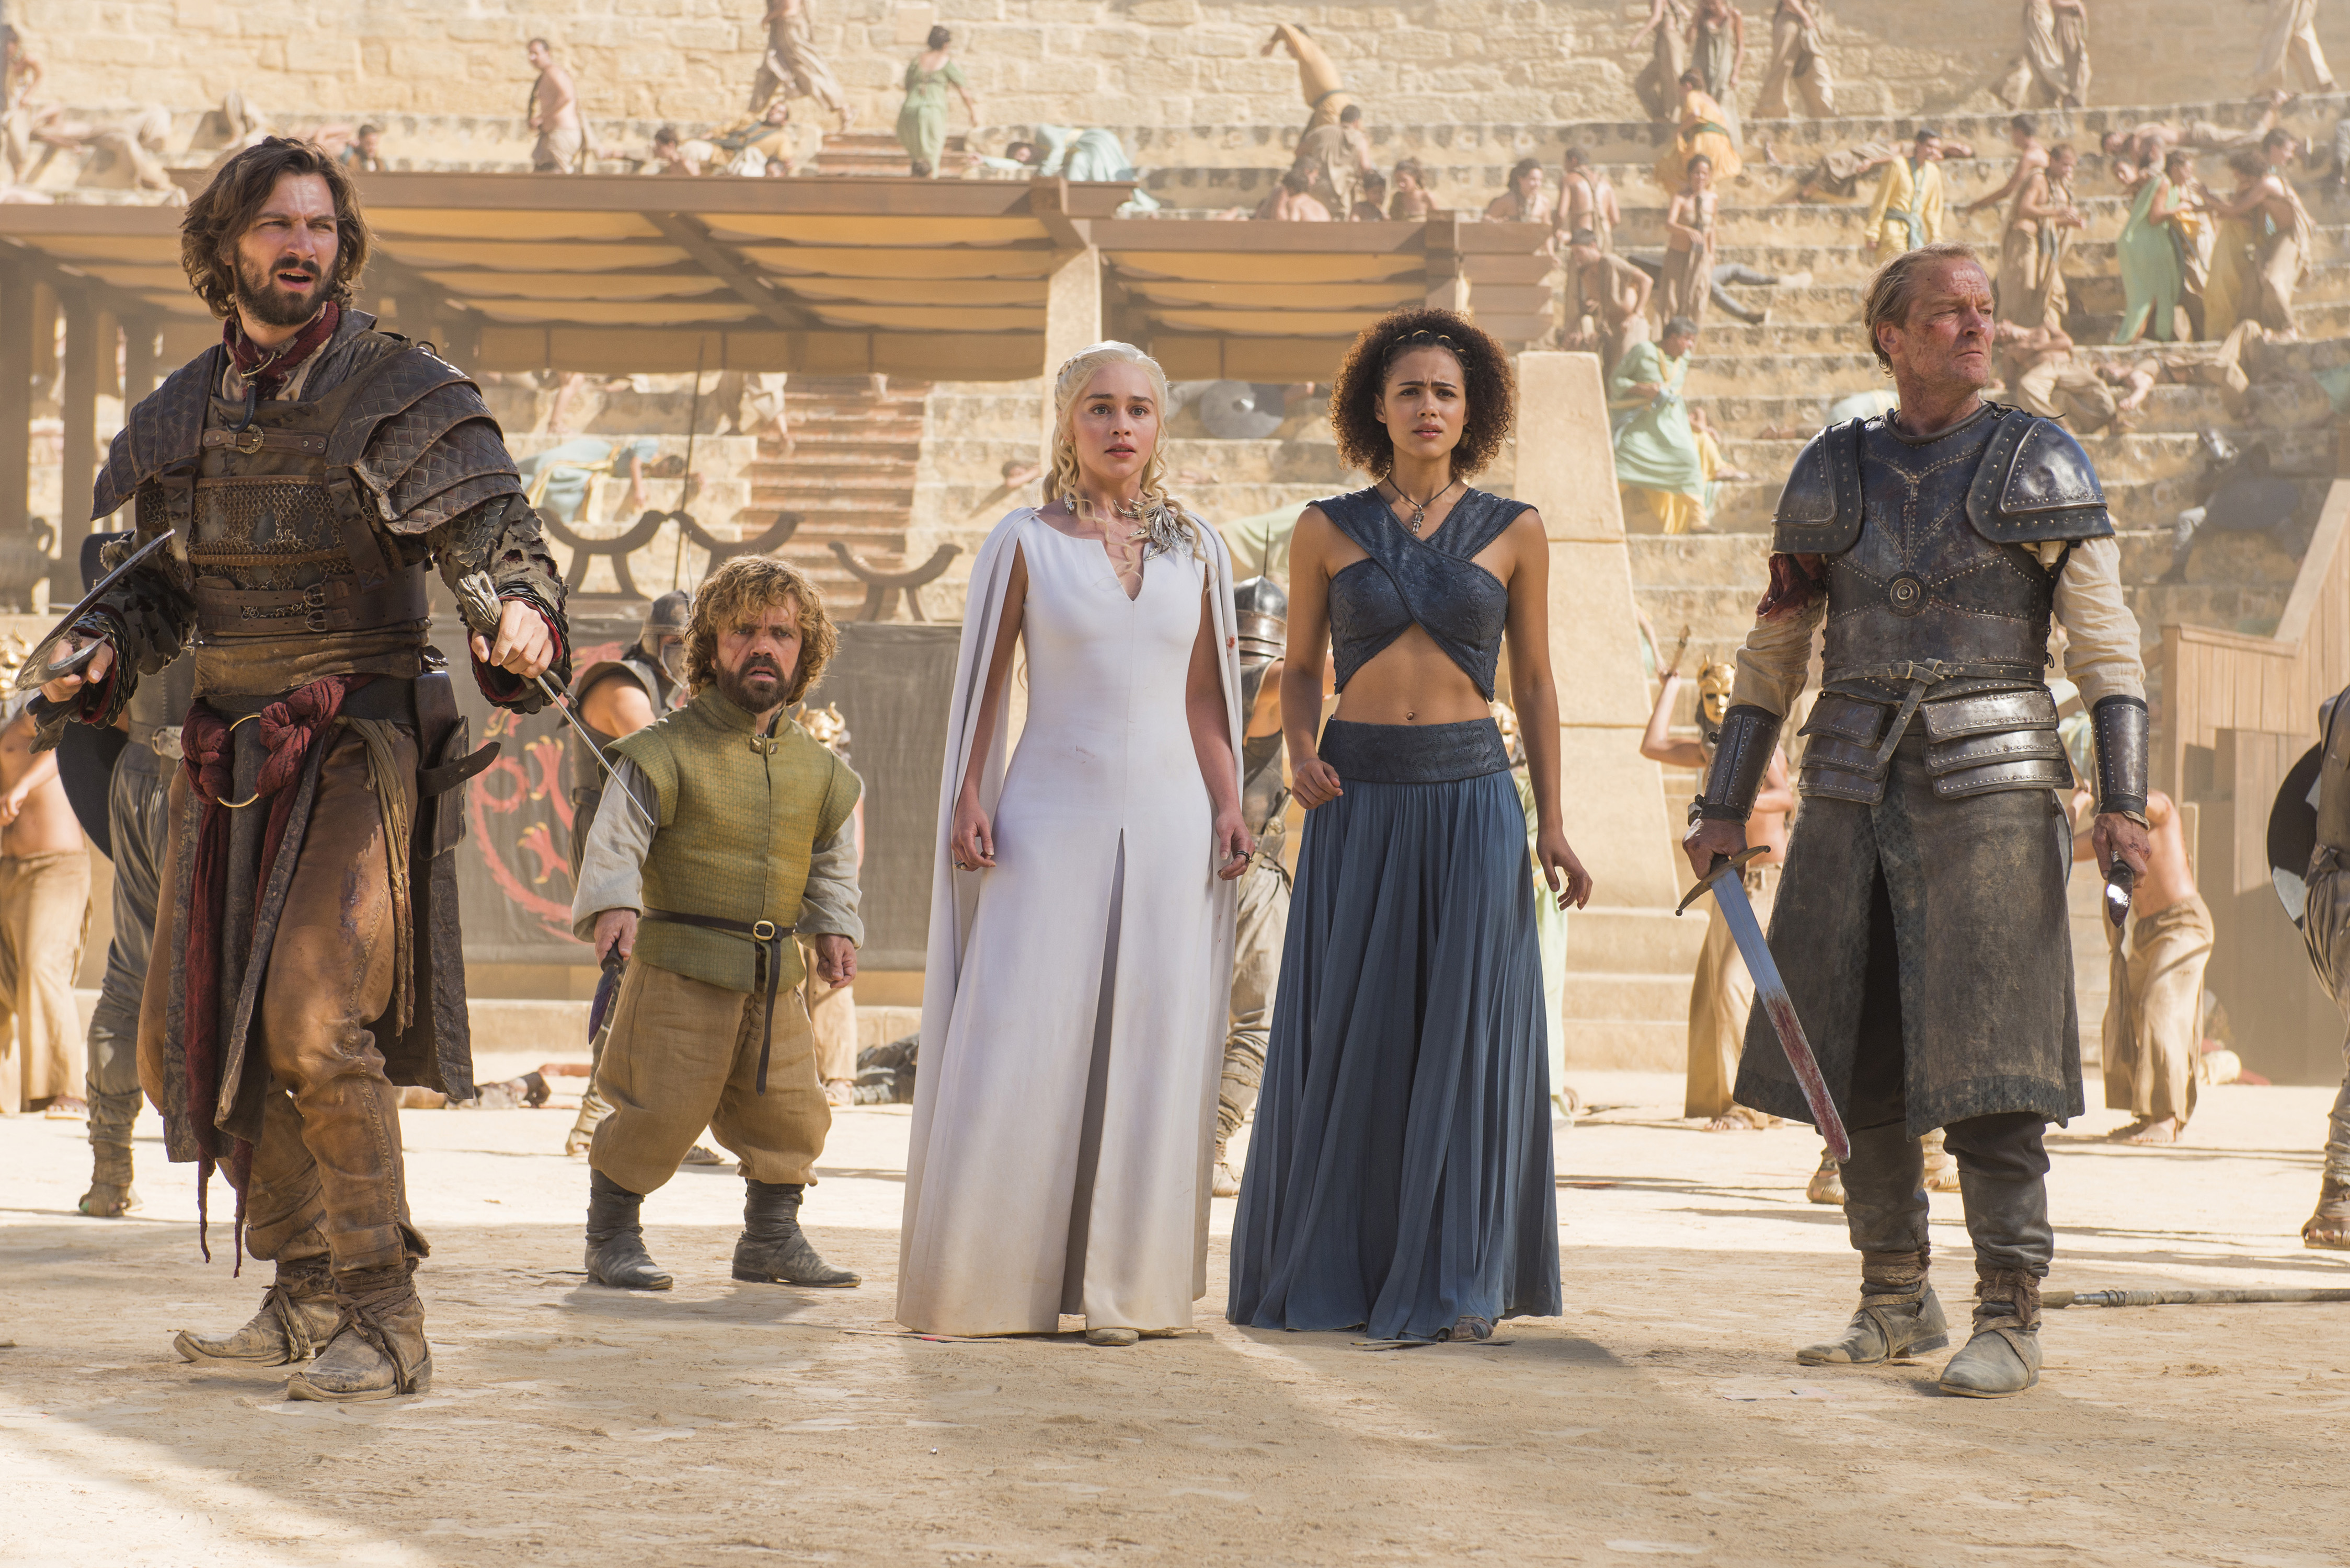 Michiel Huisman, Peter Dinklage, Emilia Clarke, Nathalie Emmanuel and Iain Glen in 'Game of Thrones' (Nick Wall courtesy of HBO)